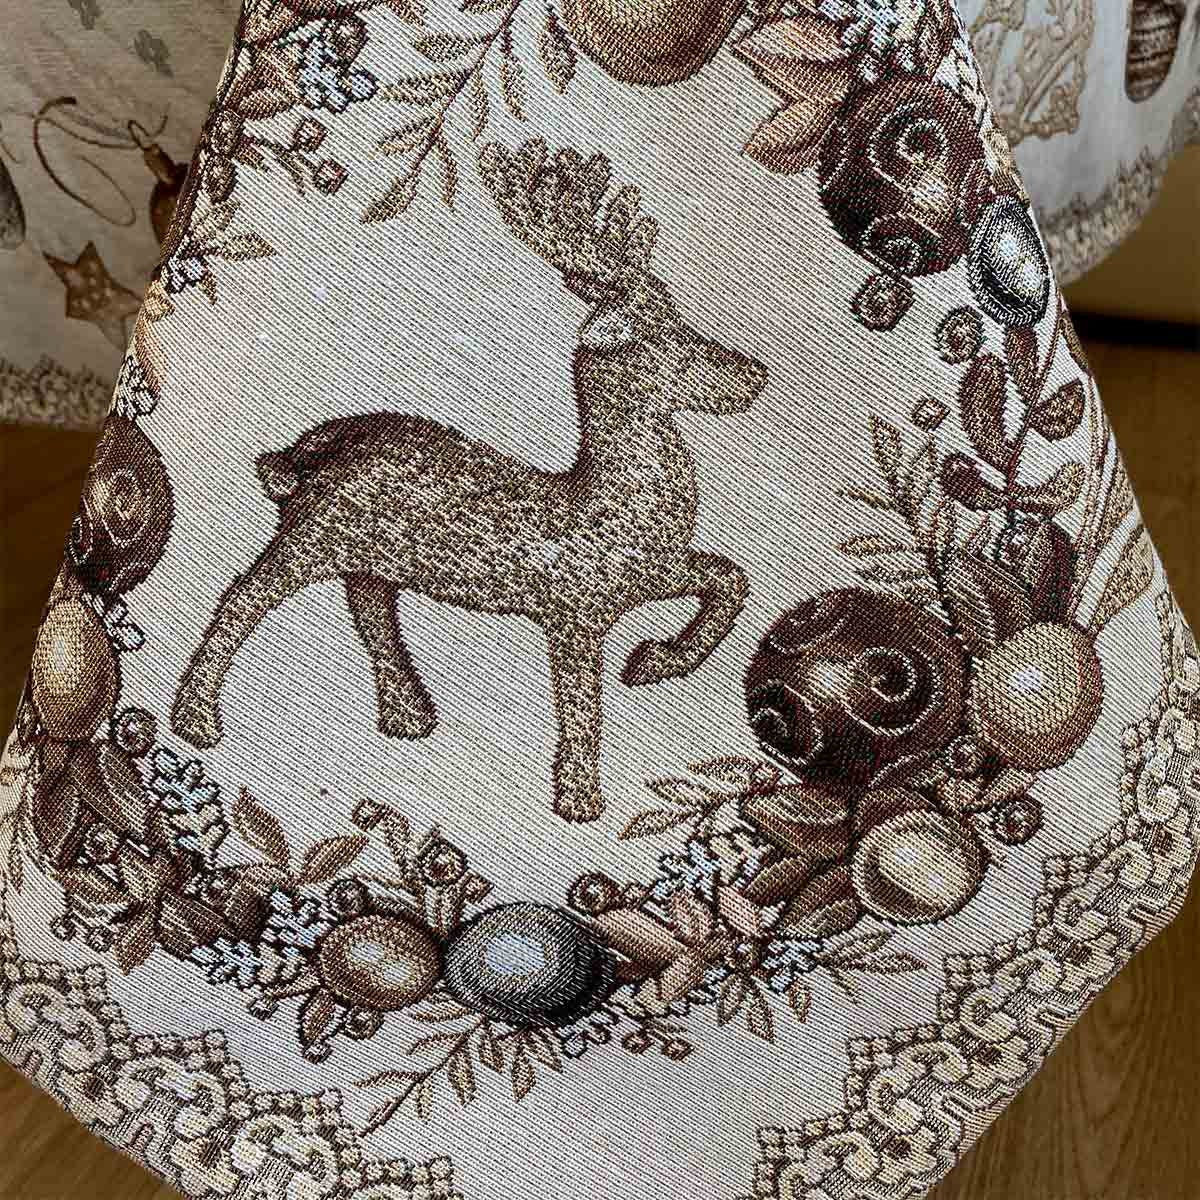 Beige And Gold Christmas Tapestry Tablecloth With Reindeer And X-mas Ornament. Festive Home Decor, Living Room Textile, Family Gift Idea.